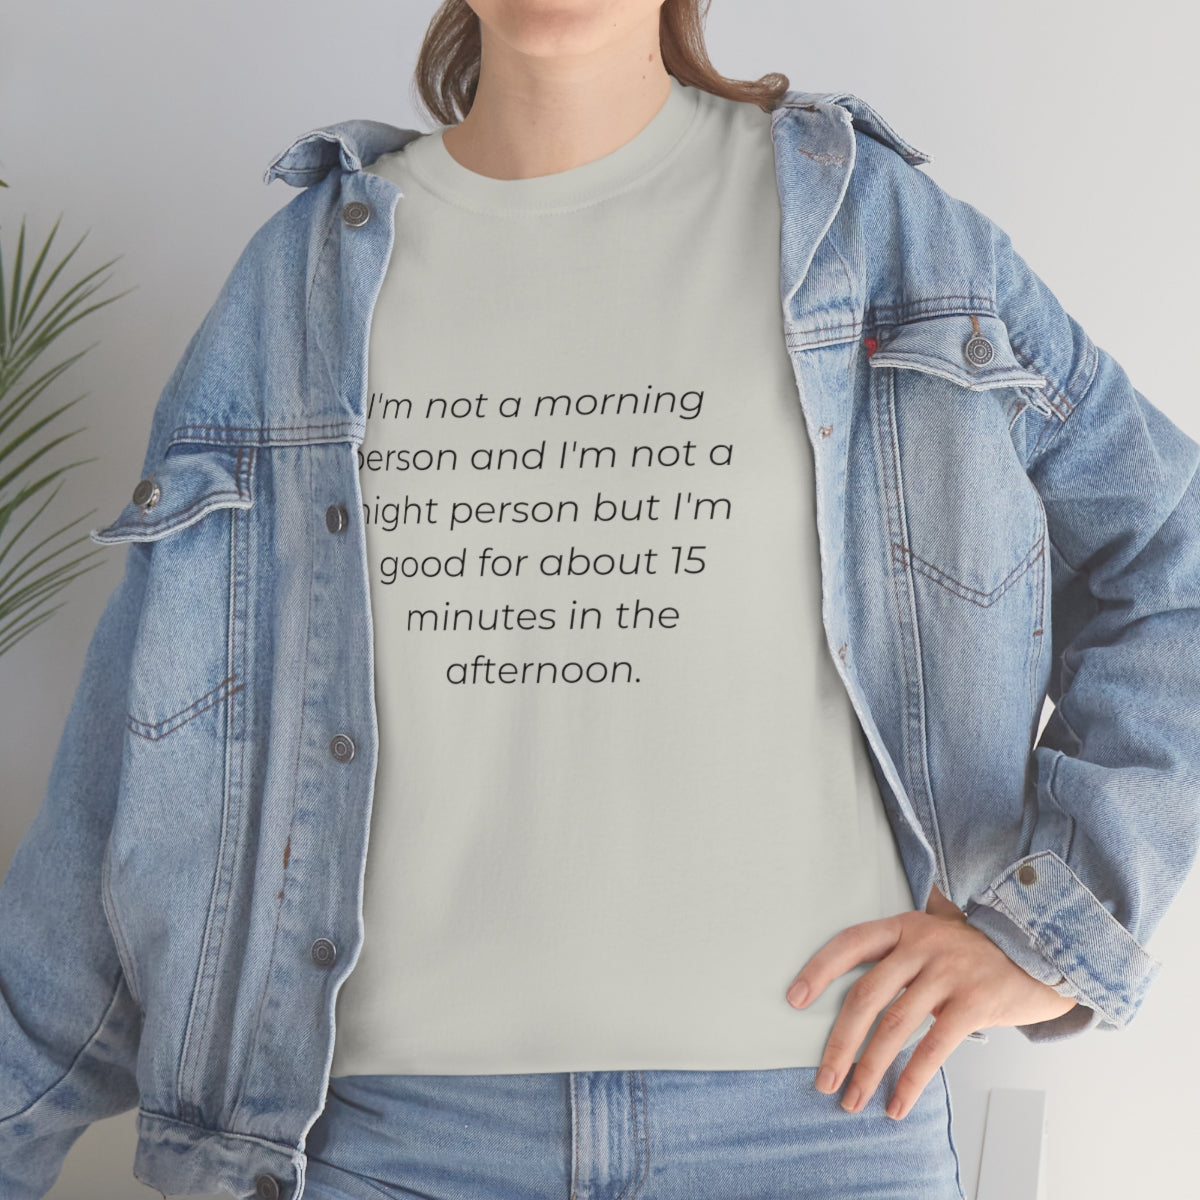 Morning Person, Not A Morning Person Tshirt, Funny T-Shirt,  Morning Motivation, Ew People, Good Morning Shirt, Mood Tee, Funny Quote Shirt - The Good Life Vibe